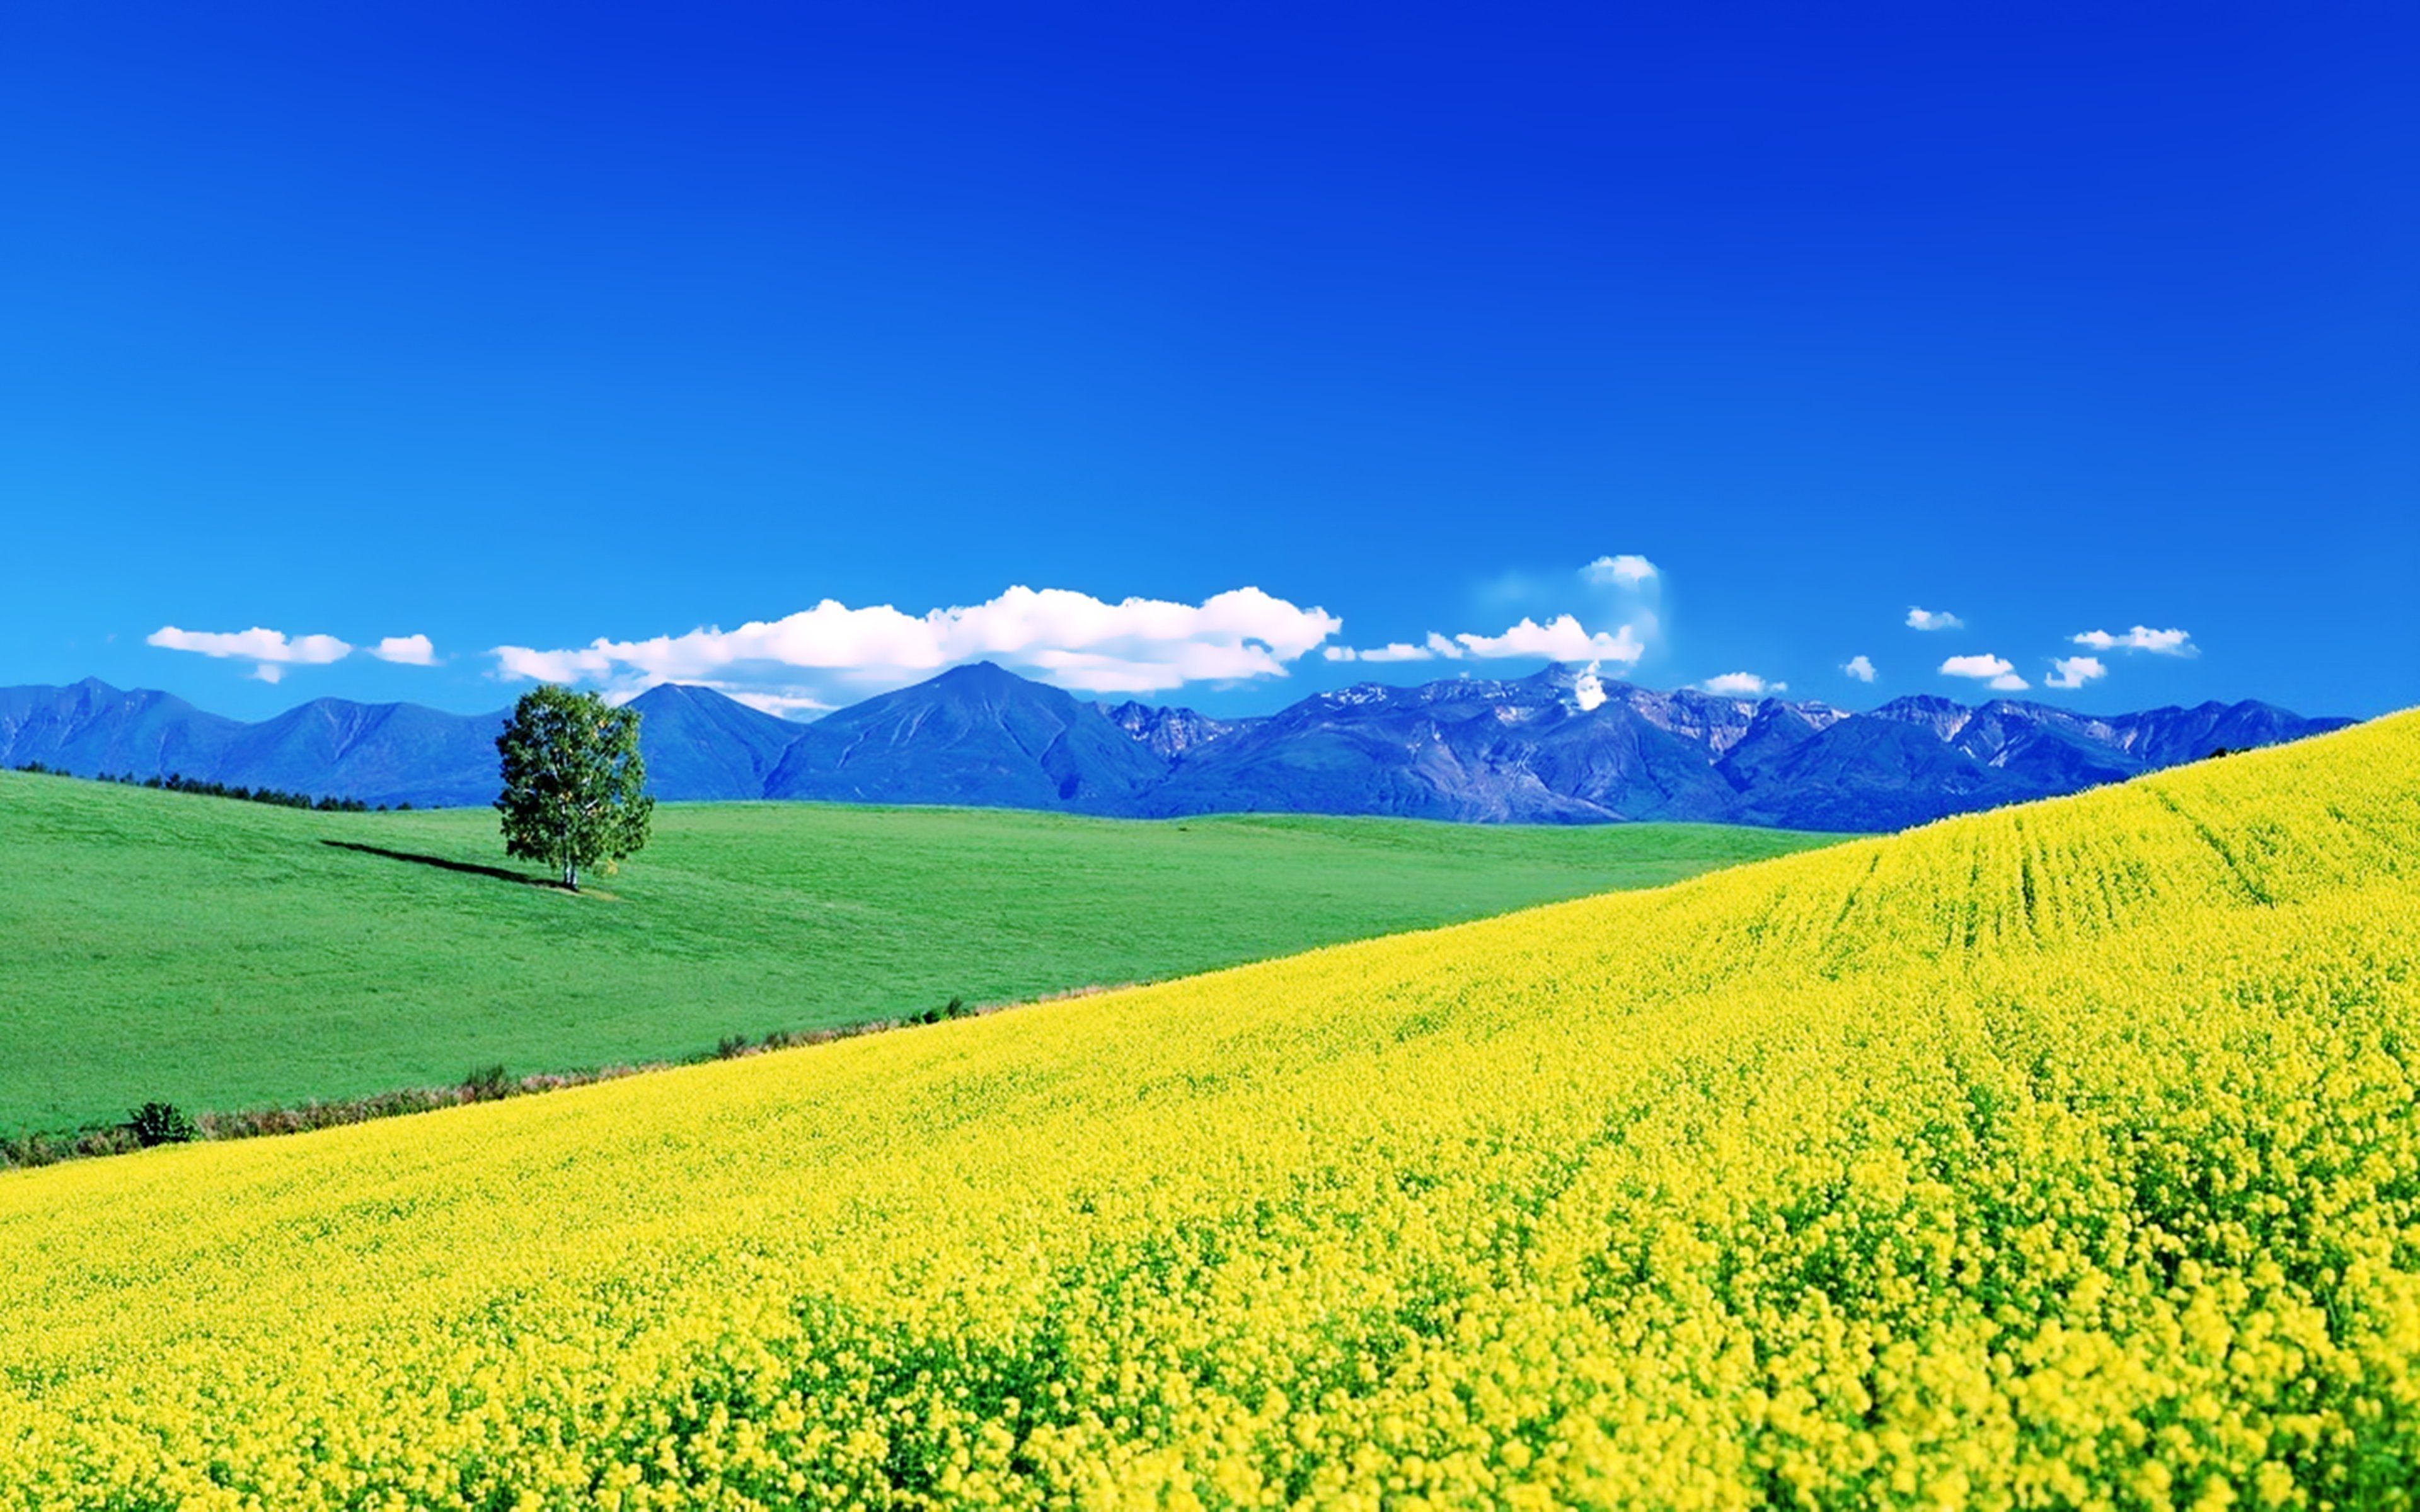 Flowers yellow fields spring earth nature landscapes sunny sky mountains hills trees green grass beauty wallpaperx2400